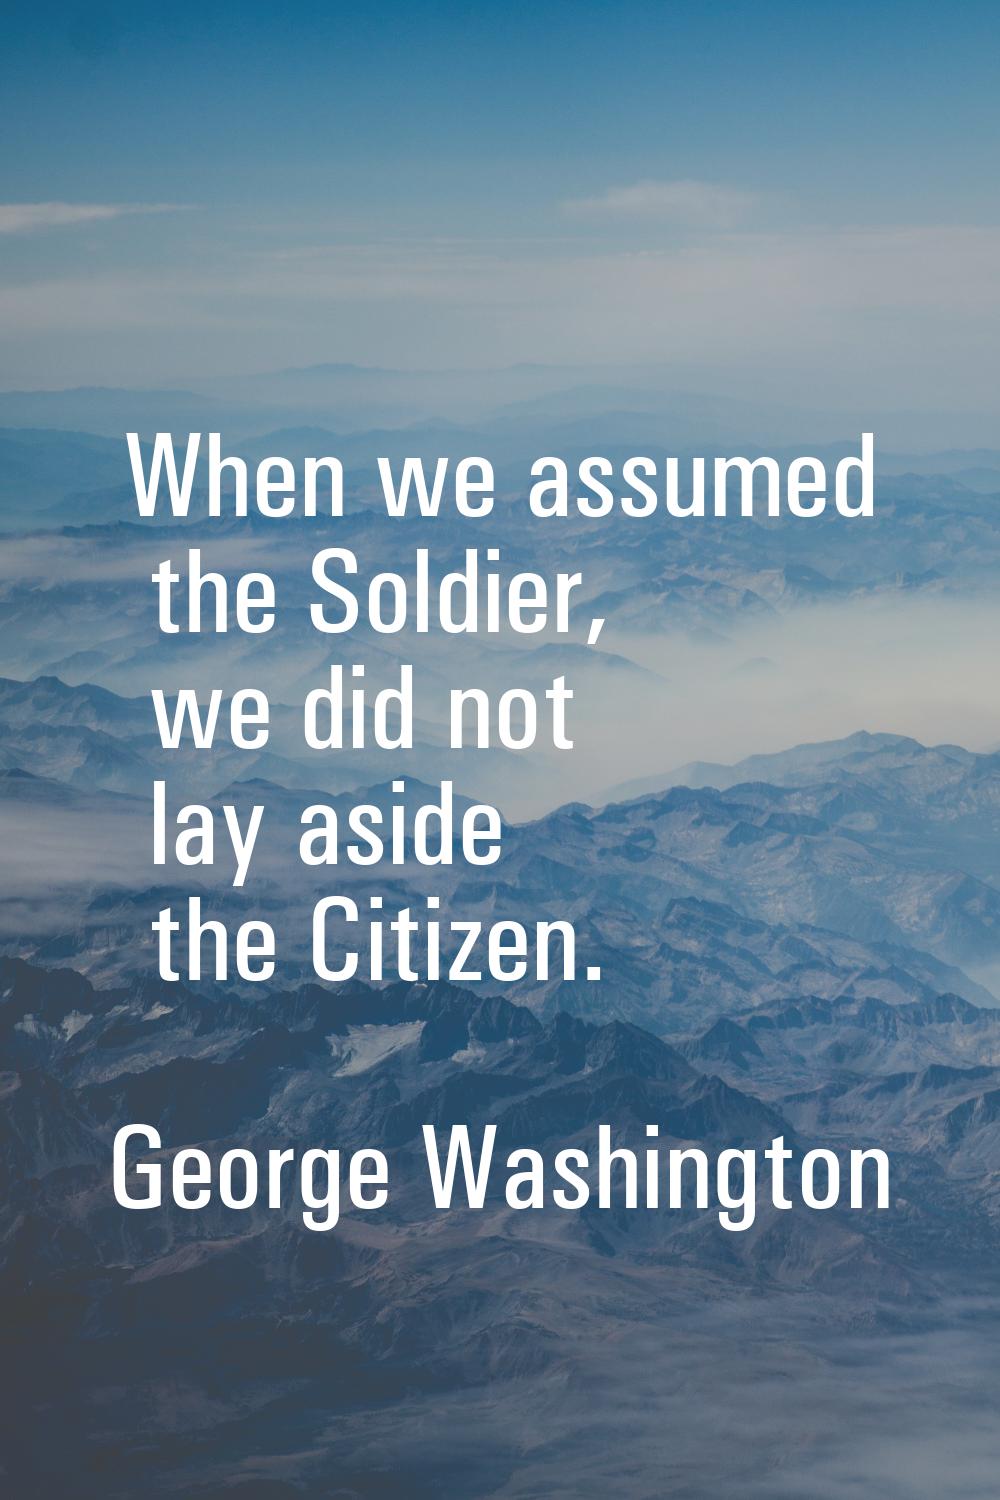 When we assumed the Soldier, we did not lay aside the Citizen.